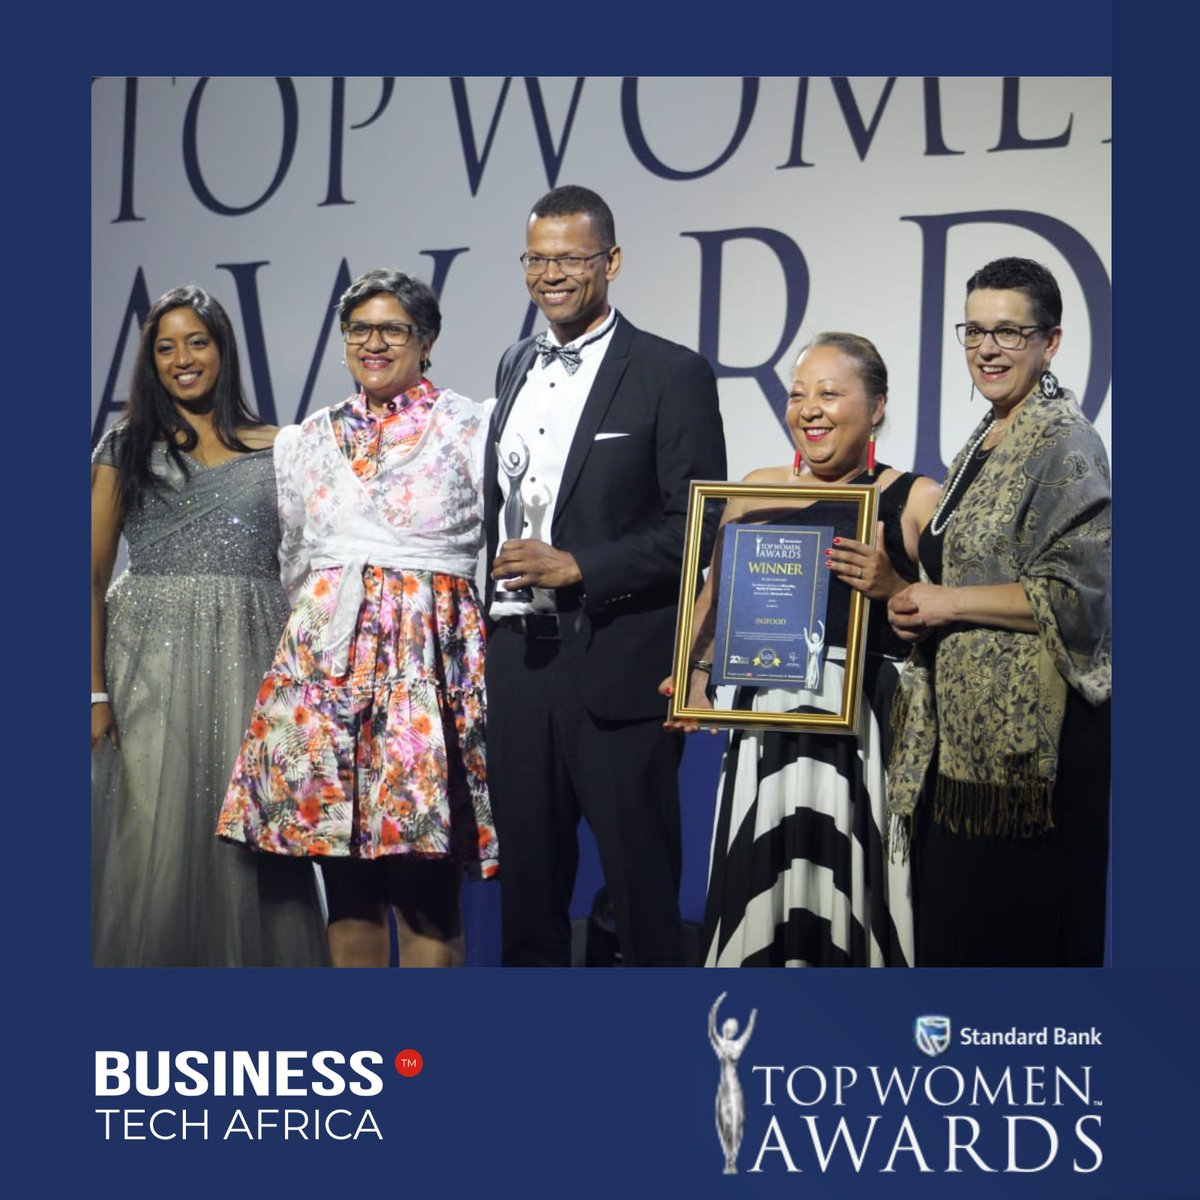 As the ceremony continues to celebrate game changing females in different industries, some winners from the Standard Bank Top Women Awards have emerged and have graced the stage to give their gratitude.

#SBTopWomenAwards  #SBTopWomen  #RiseAboveTheNoise